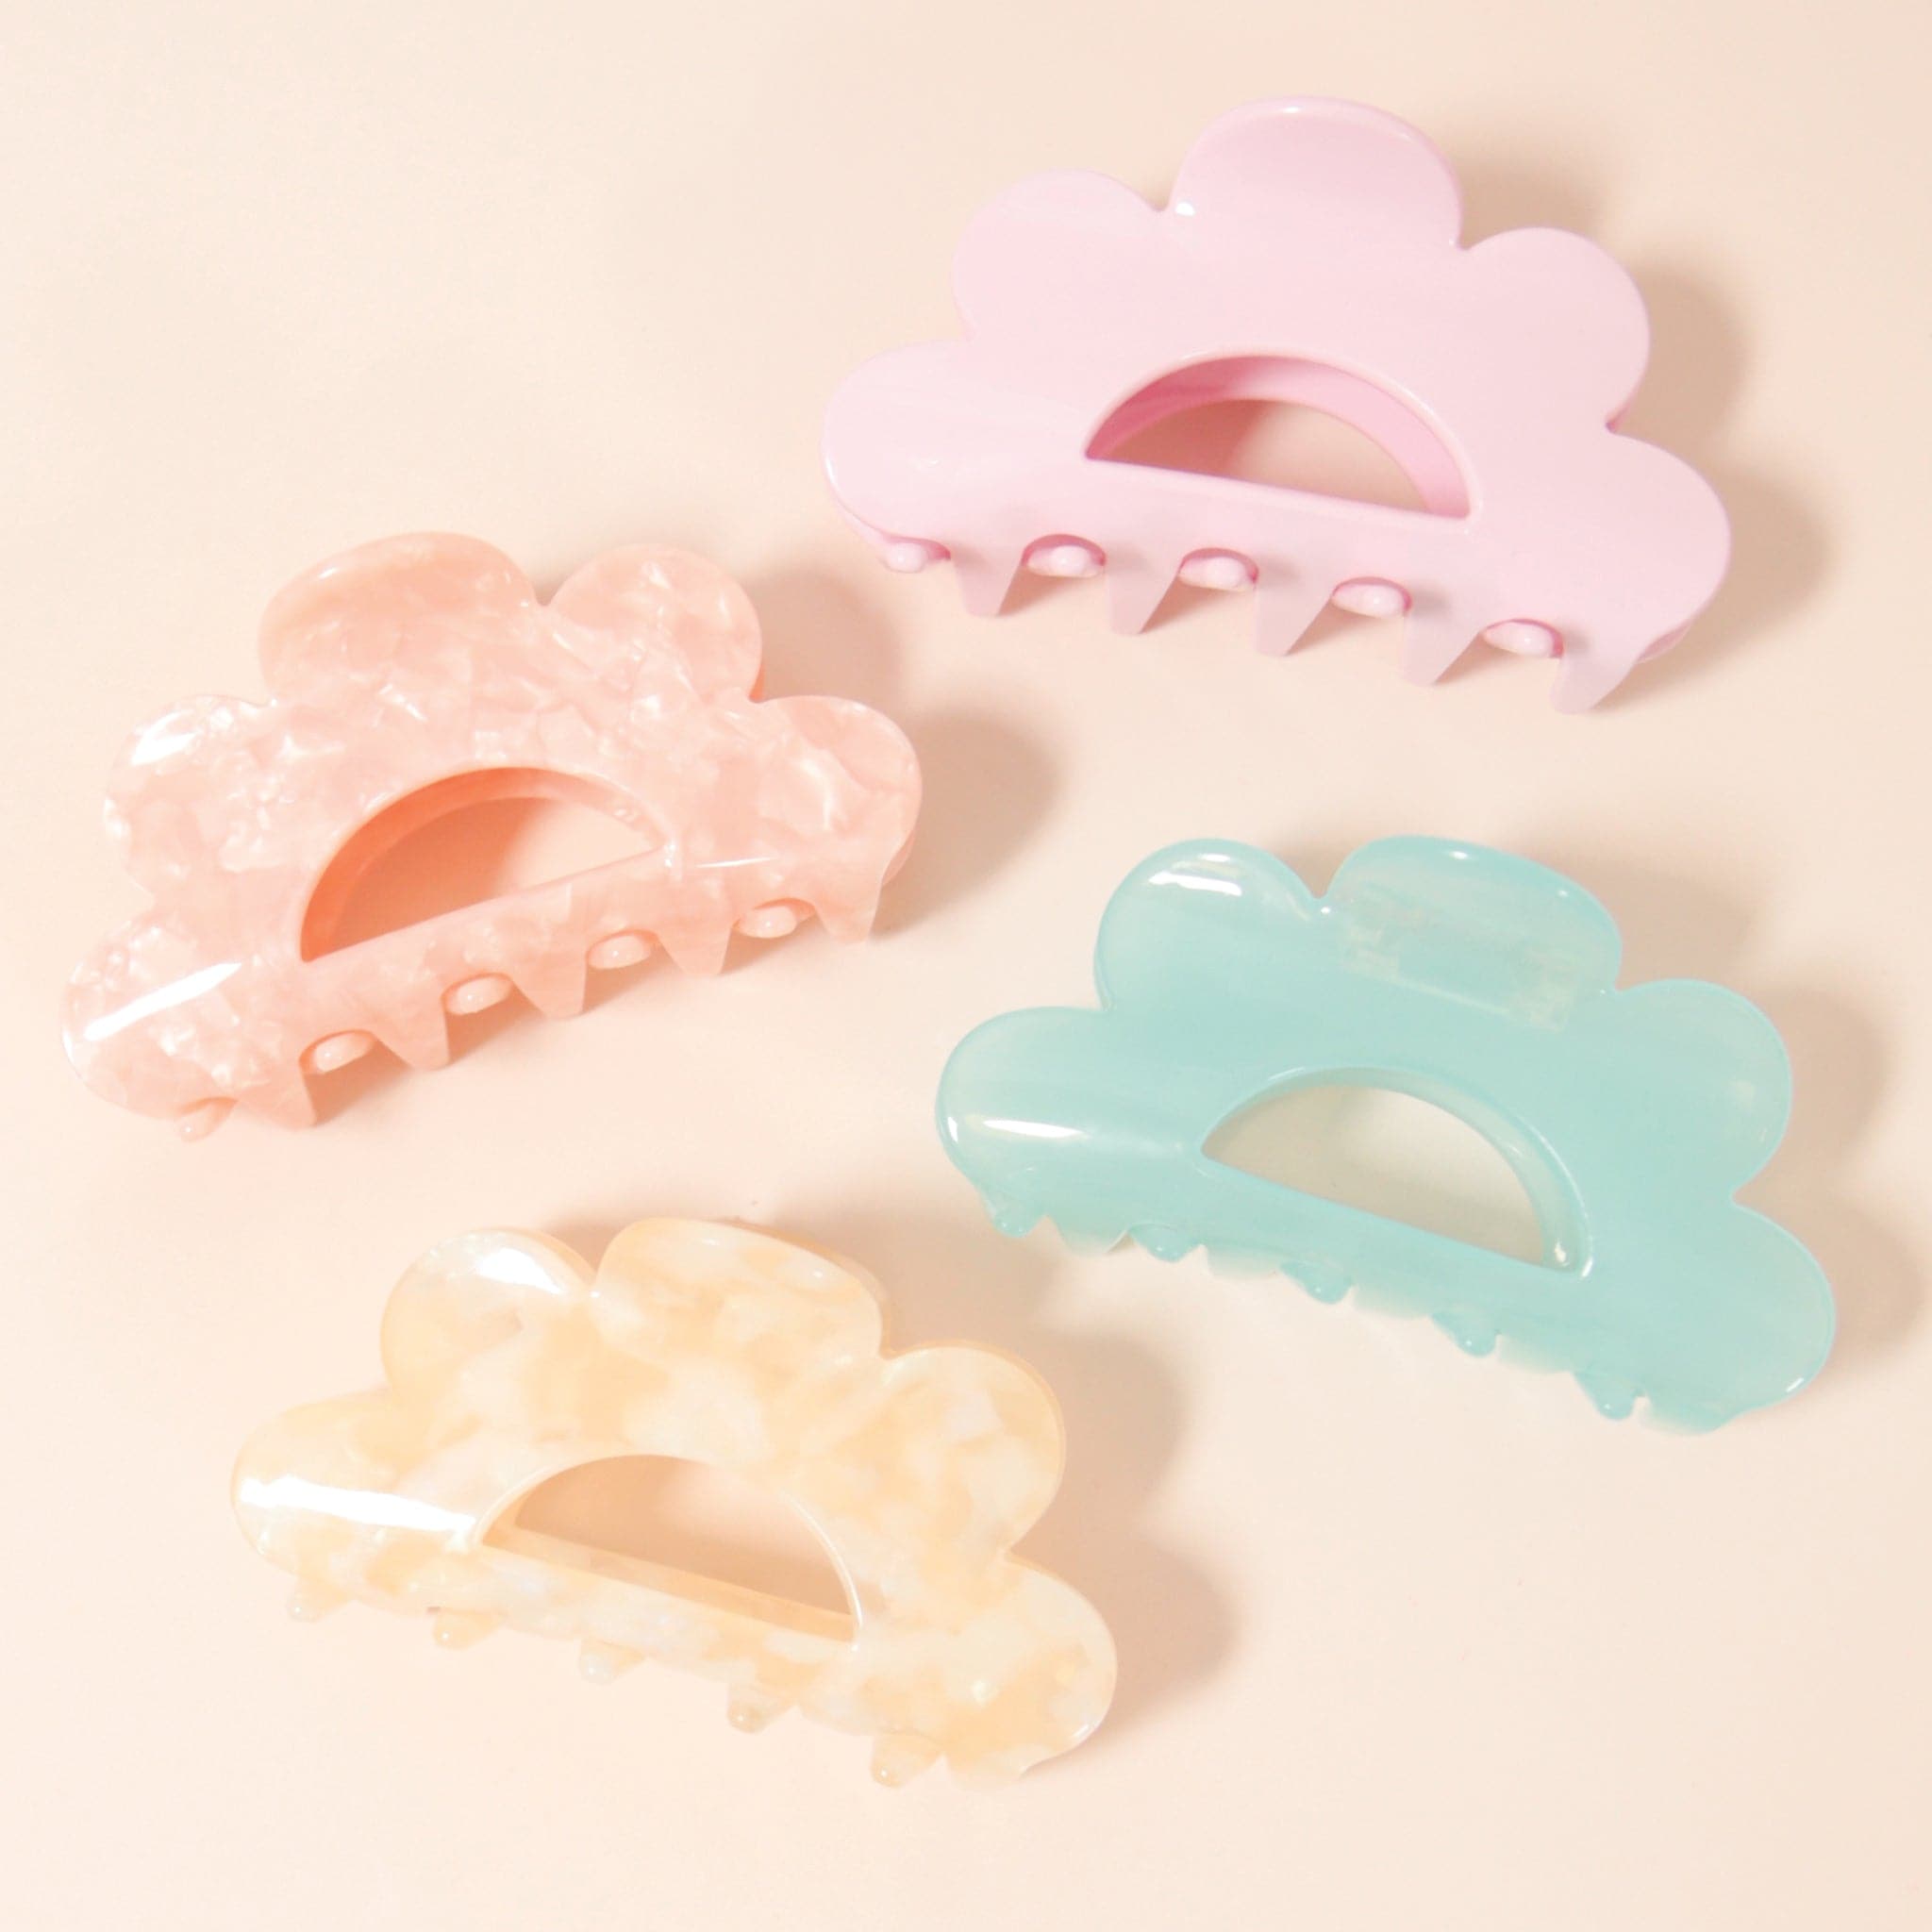 A lilac scalloped claw clip made of durable plastic.